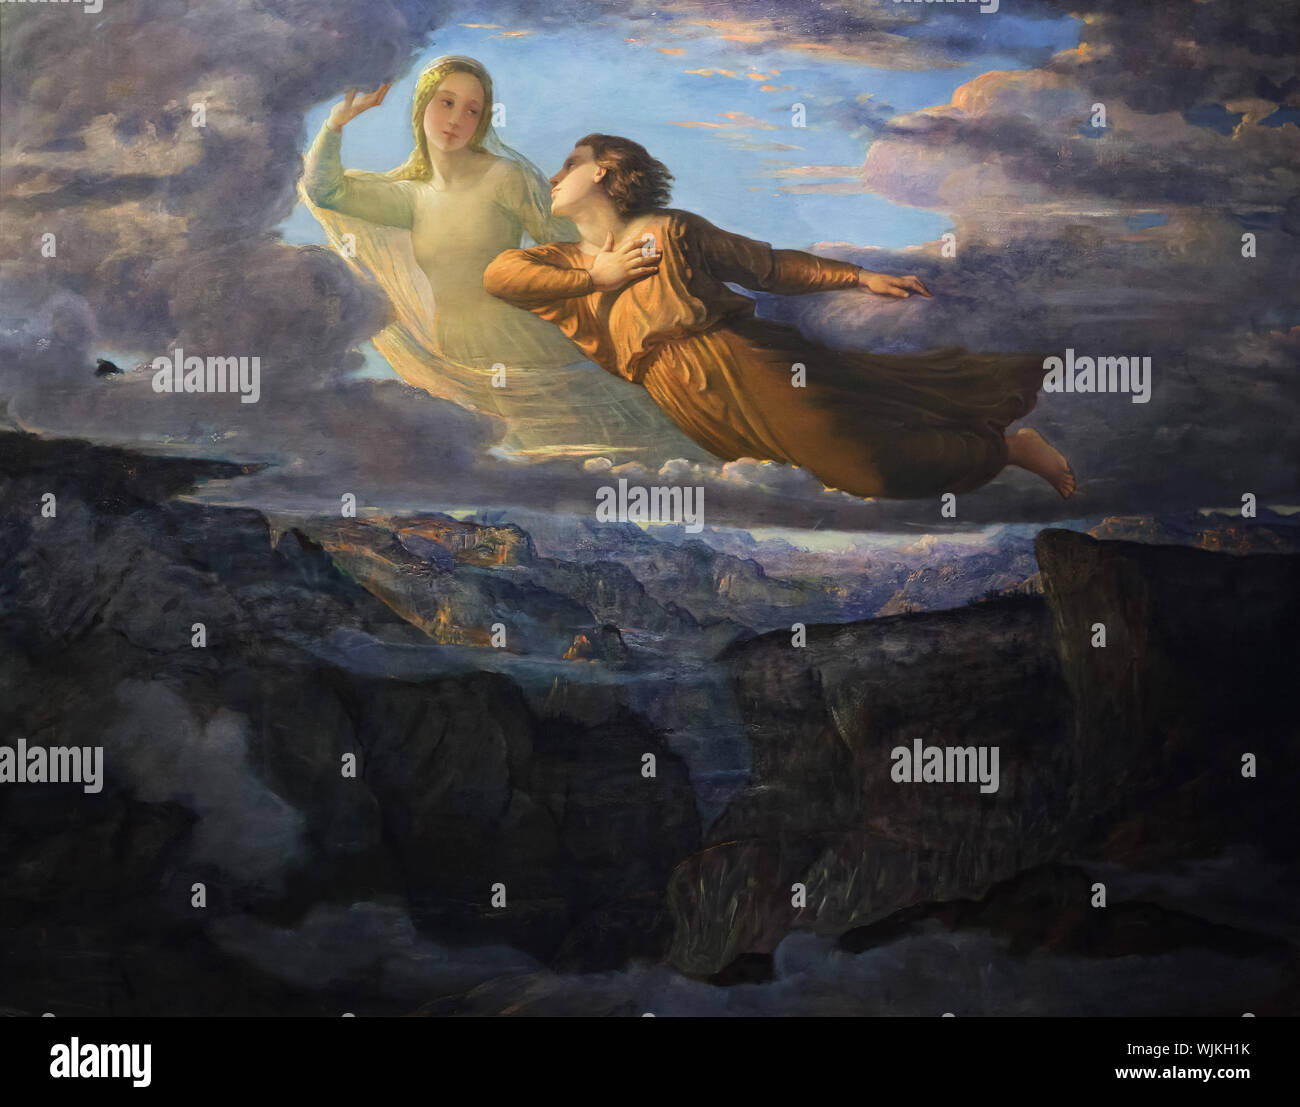 Painting 'The Ideal' ('L'Idéal') from the cycles 'The Poem of the Soul' (1835-1855) by French symbolist painter Louis Janmot on display in the Museum of Fine Arts (Musée des Beaux-Arts de Lyon) in Lyon, France. Stock Photo